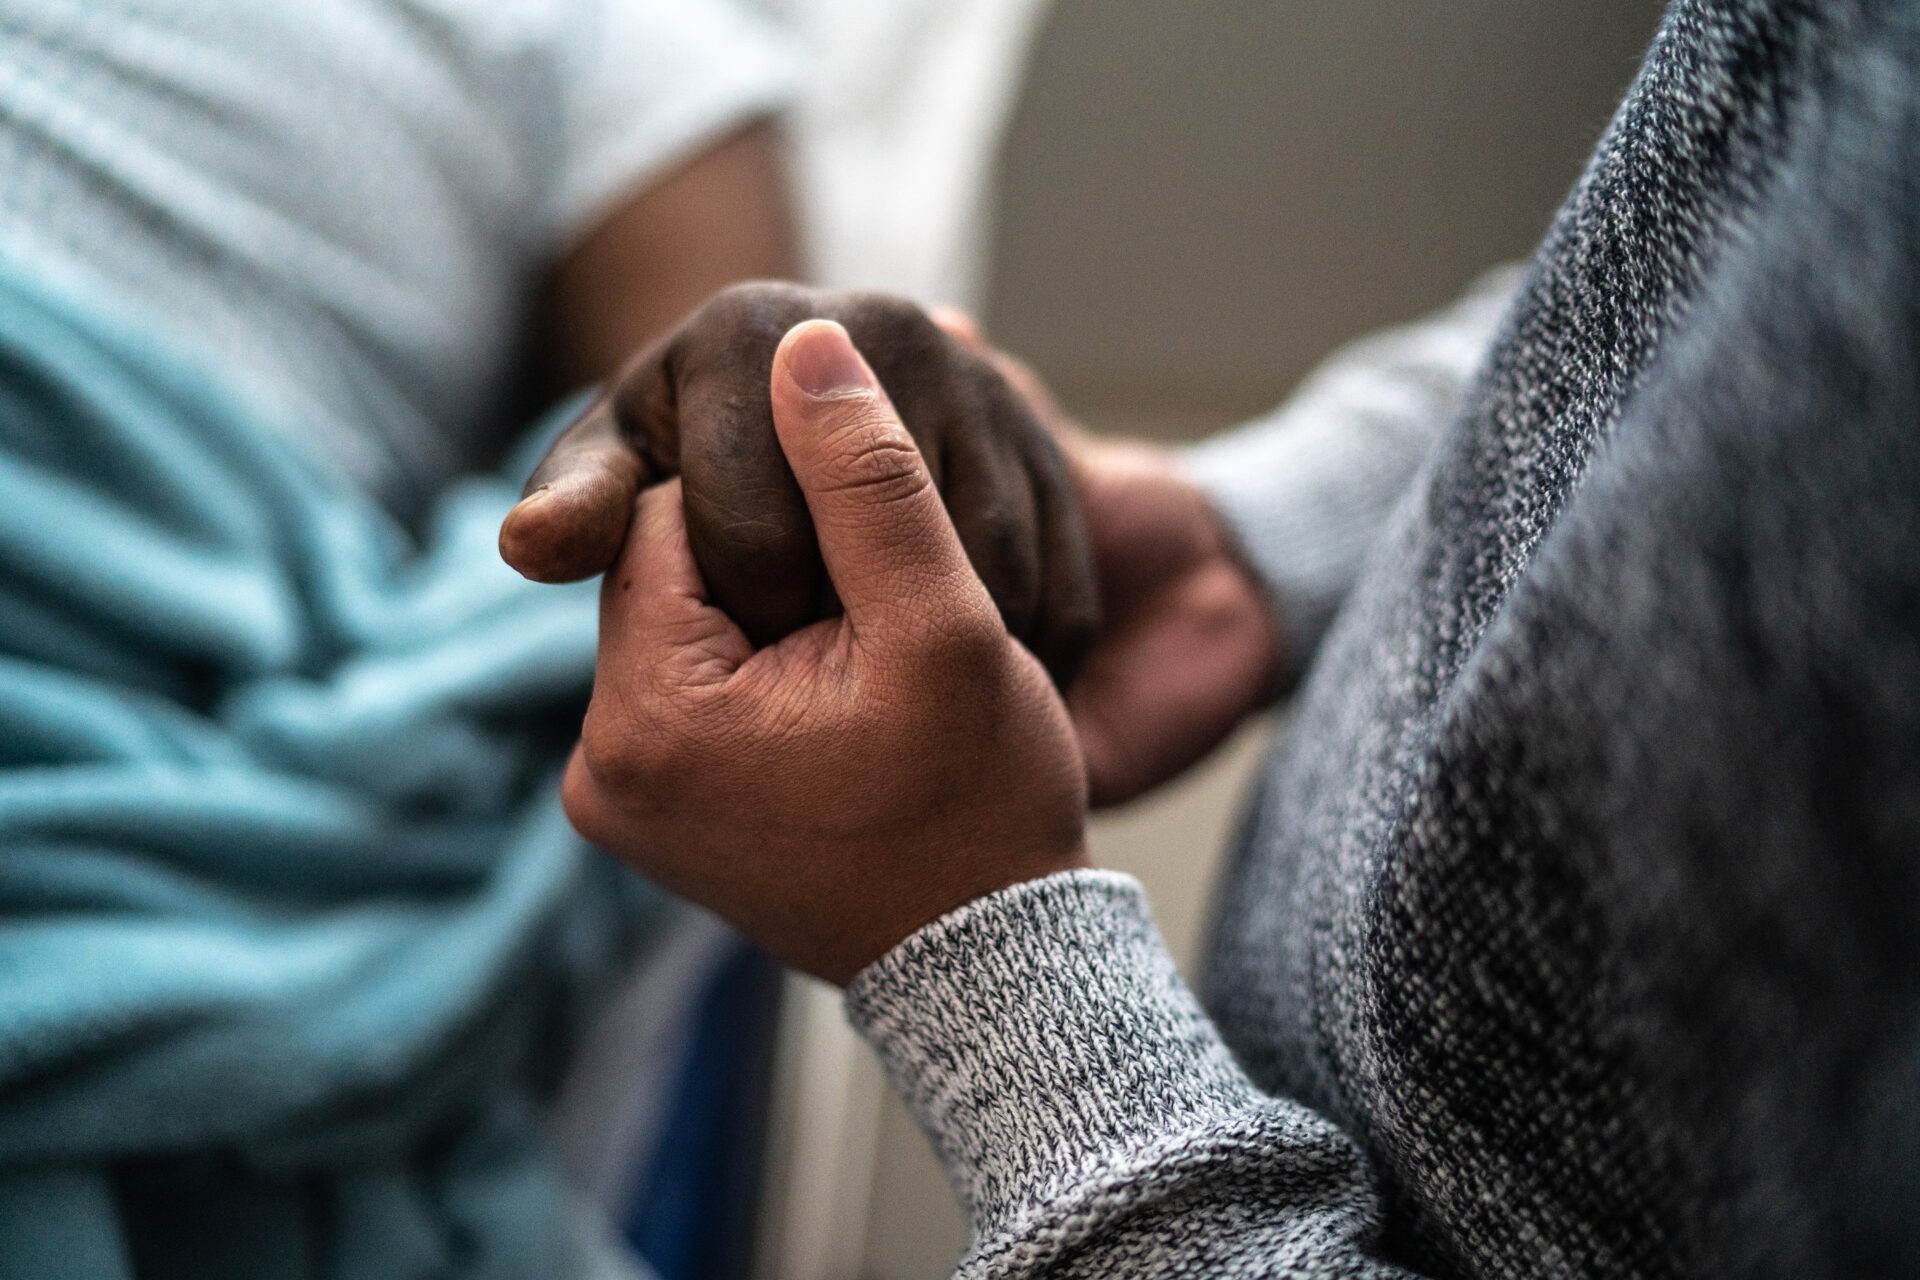 A person holds the hands of a patient in the hospital bed